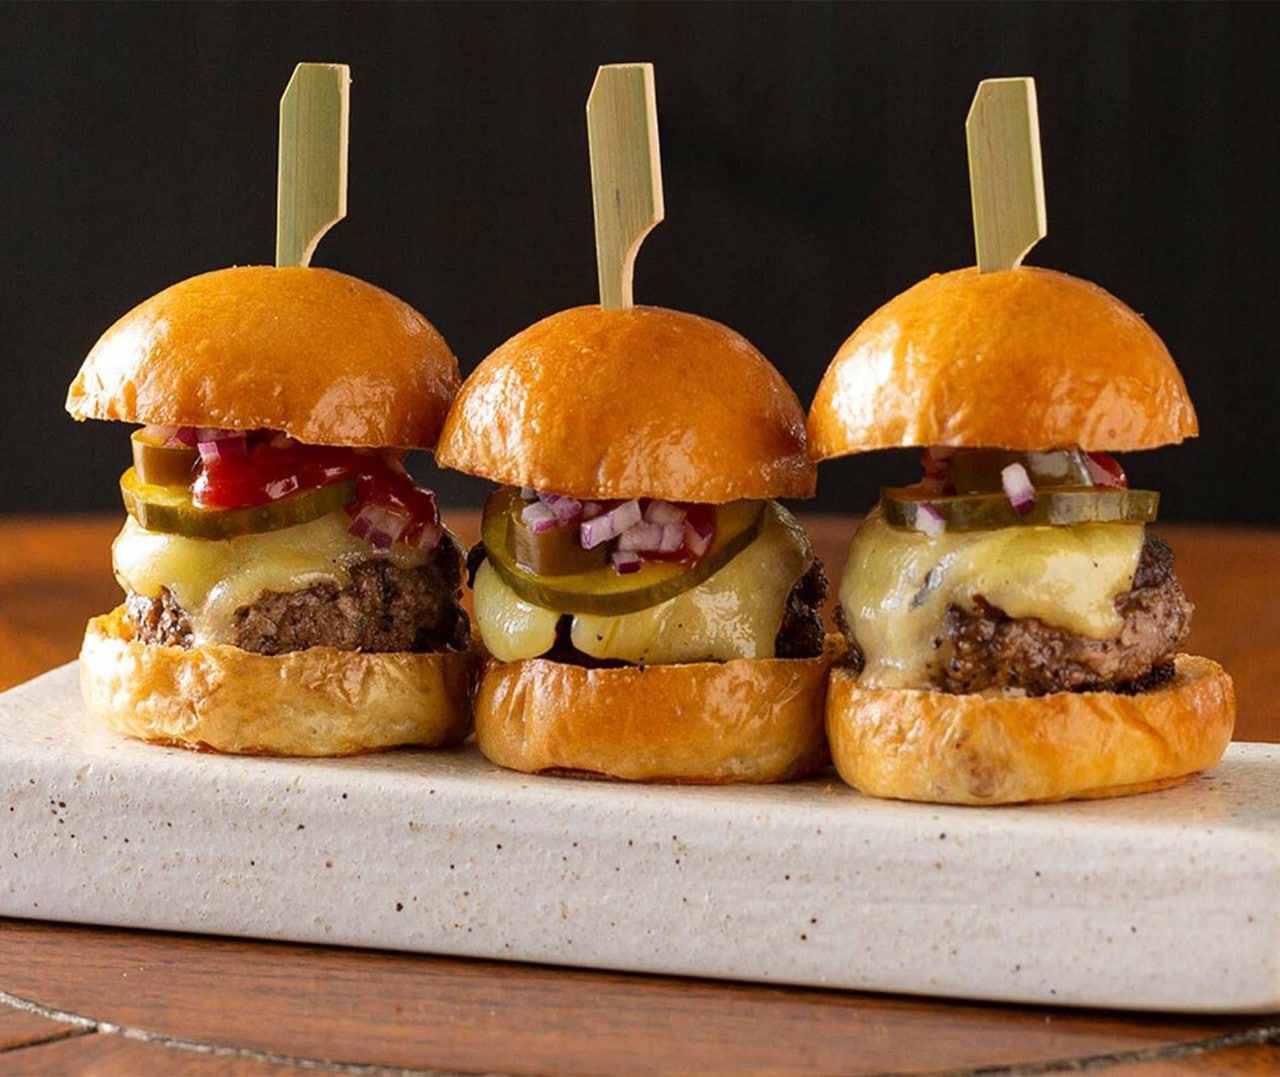 Angus beef sliders served at the best burger places in Singapore